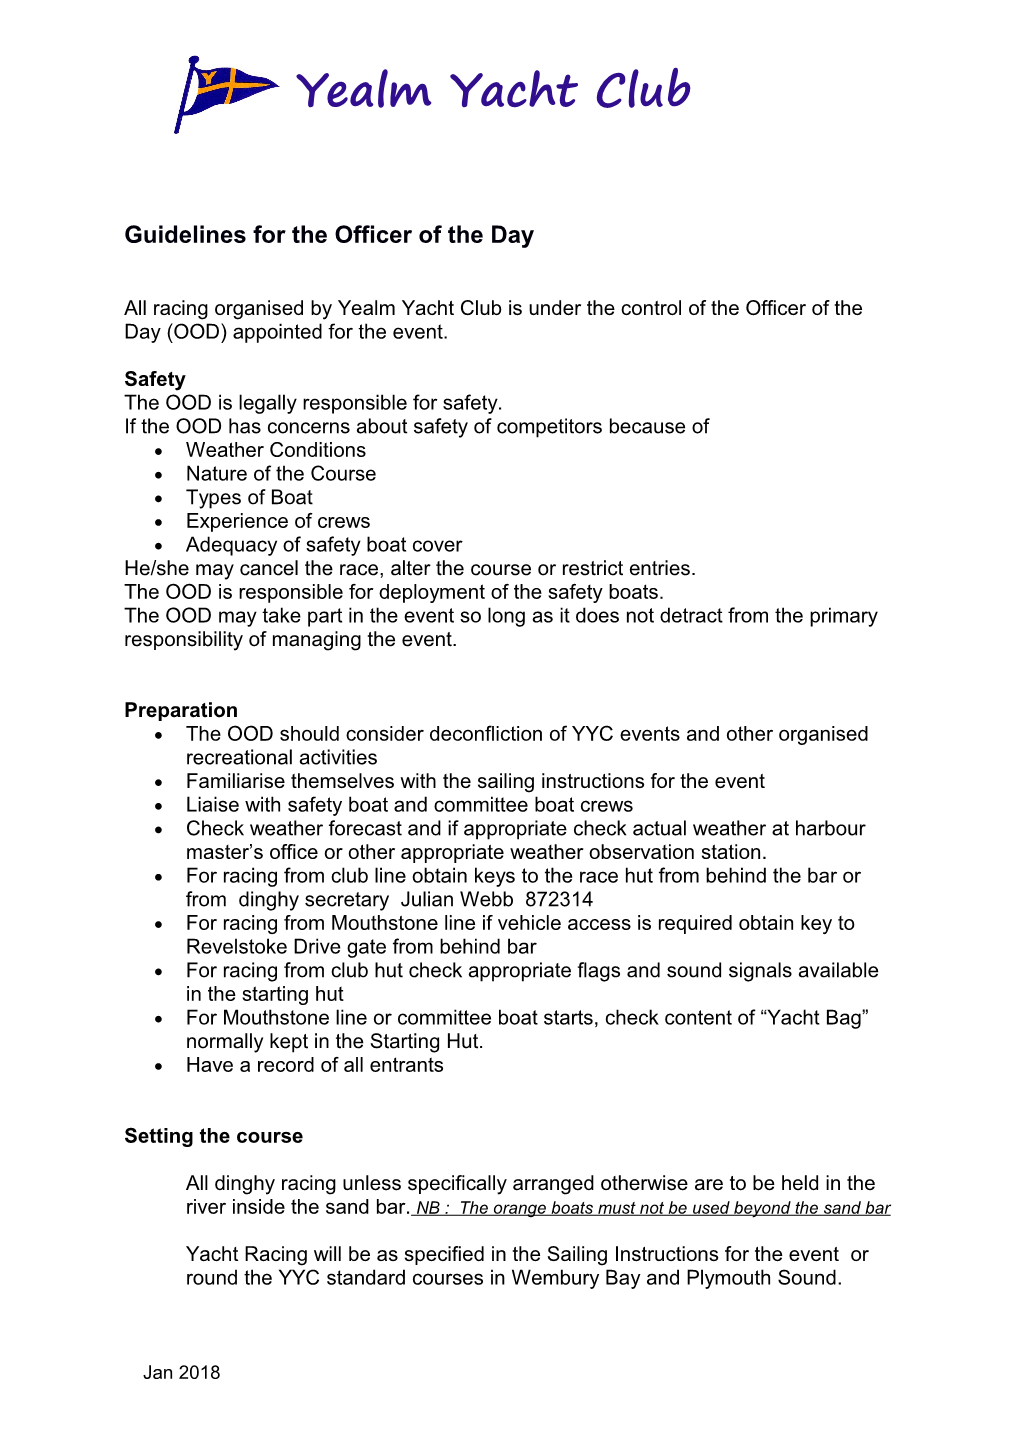 Guidelines for the Officer of the Day